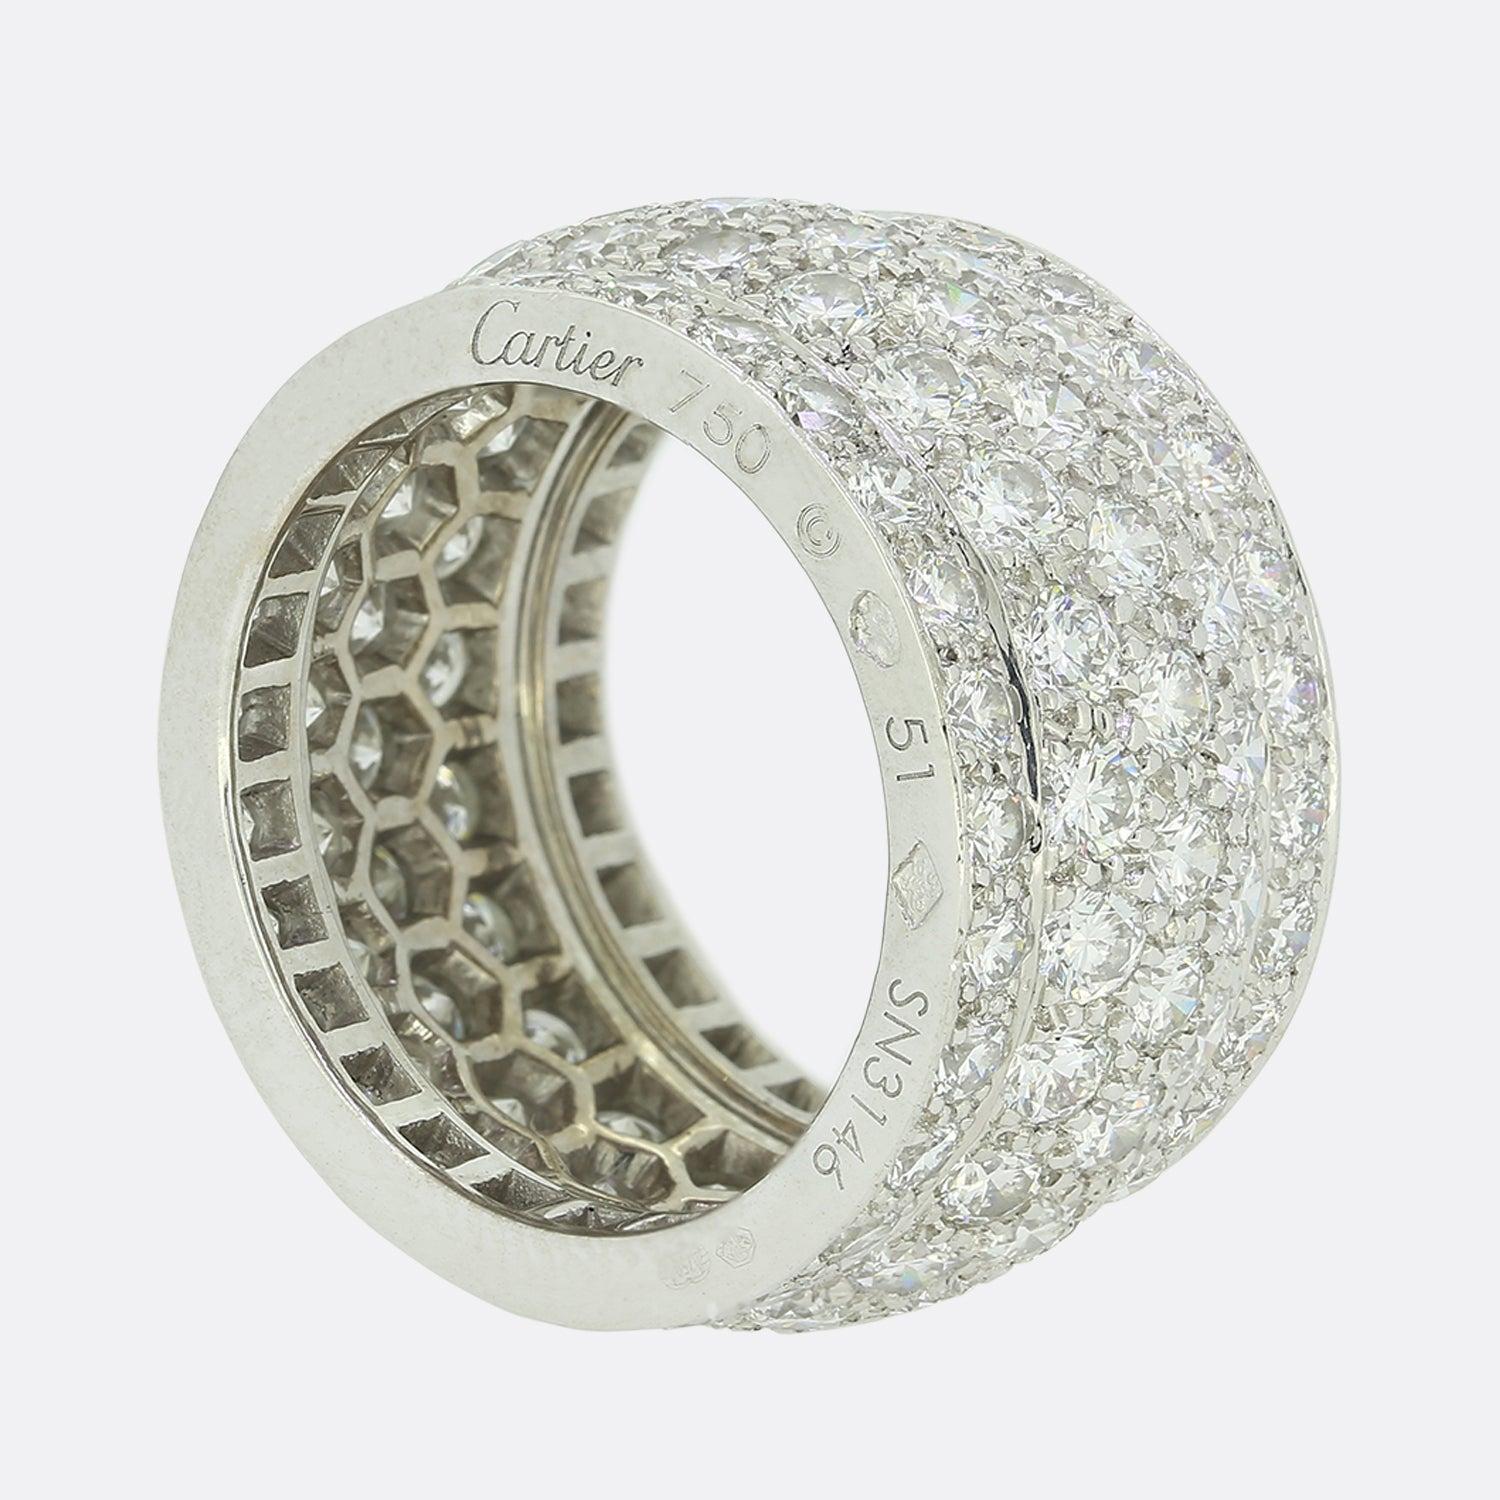 This is a beautiful pave diamond ring from the luxury jewellery designer Cartier. The design is recognisable as Cartiers Nigeria collection and has been pave set with 122 high quality round brilliant cut diamonds weighing a total of 5.50 carats and